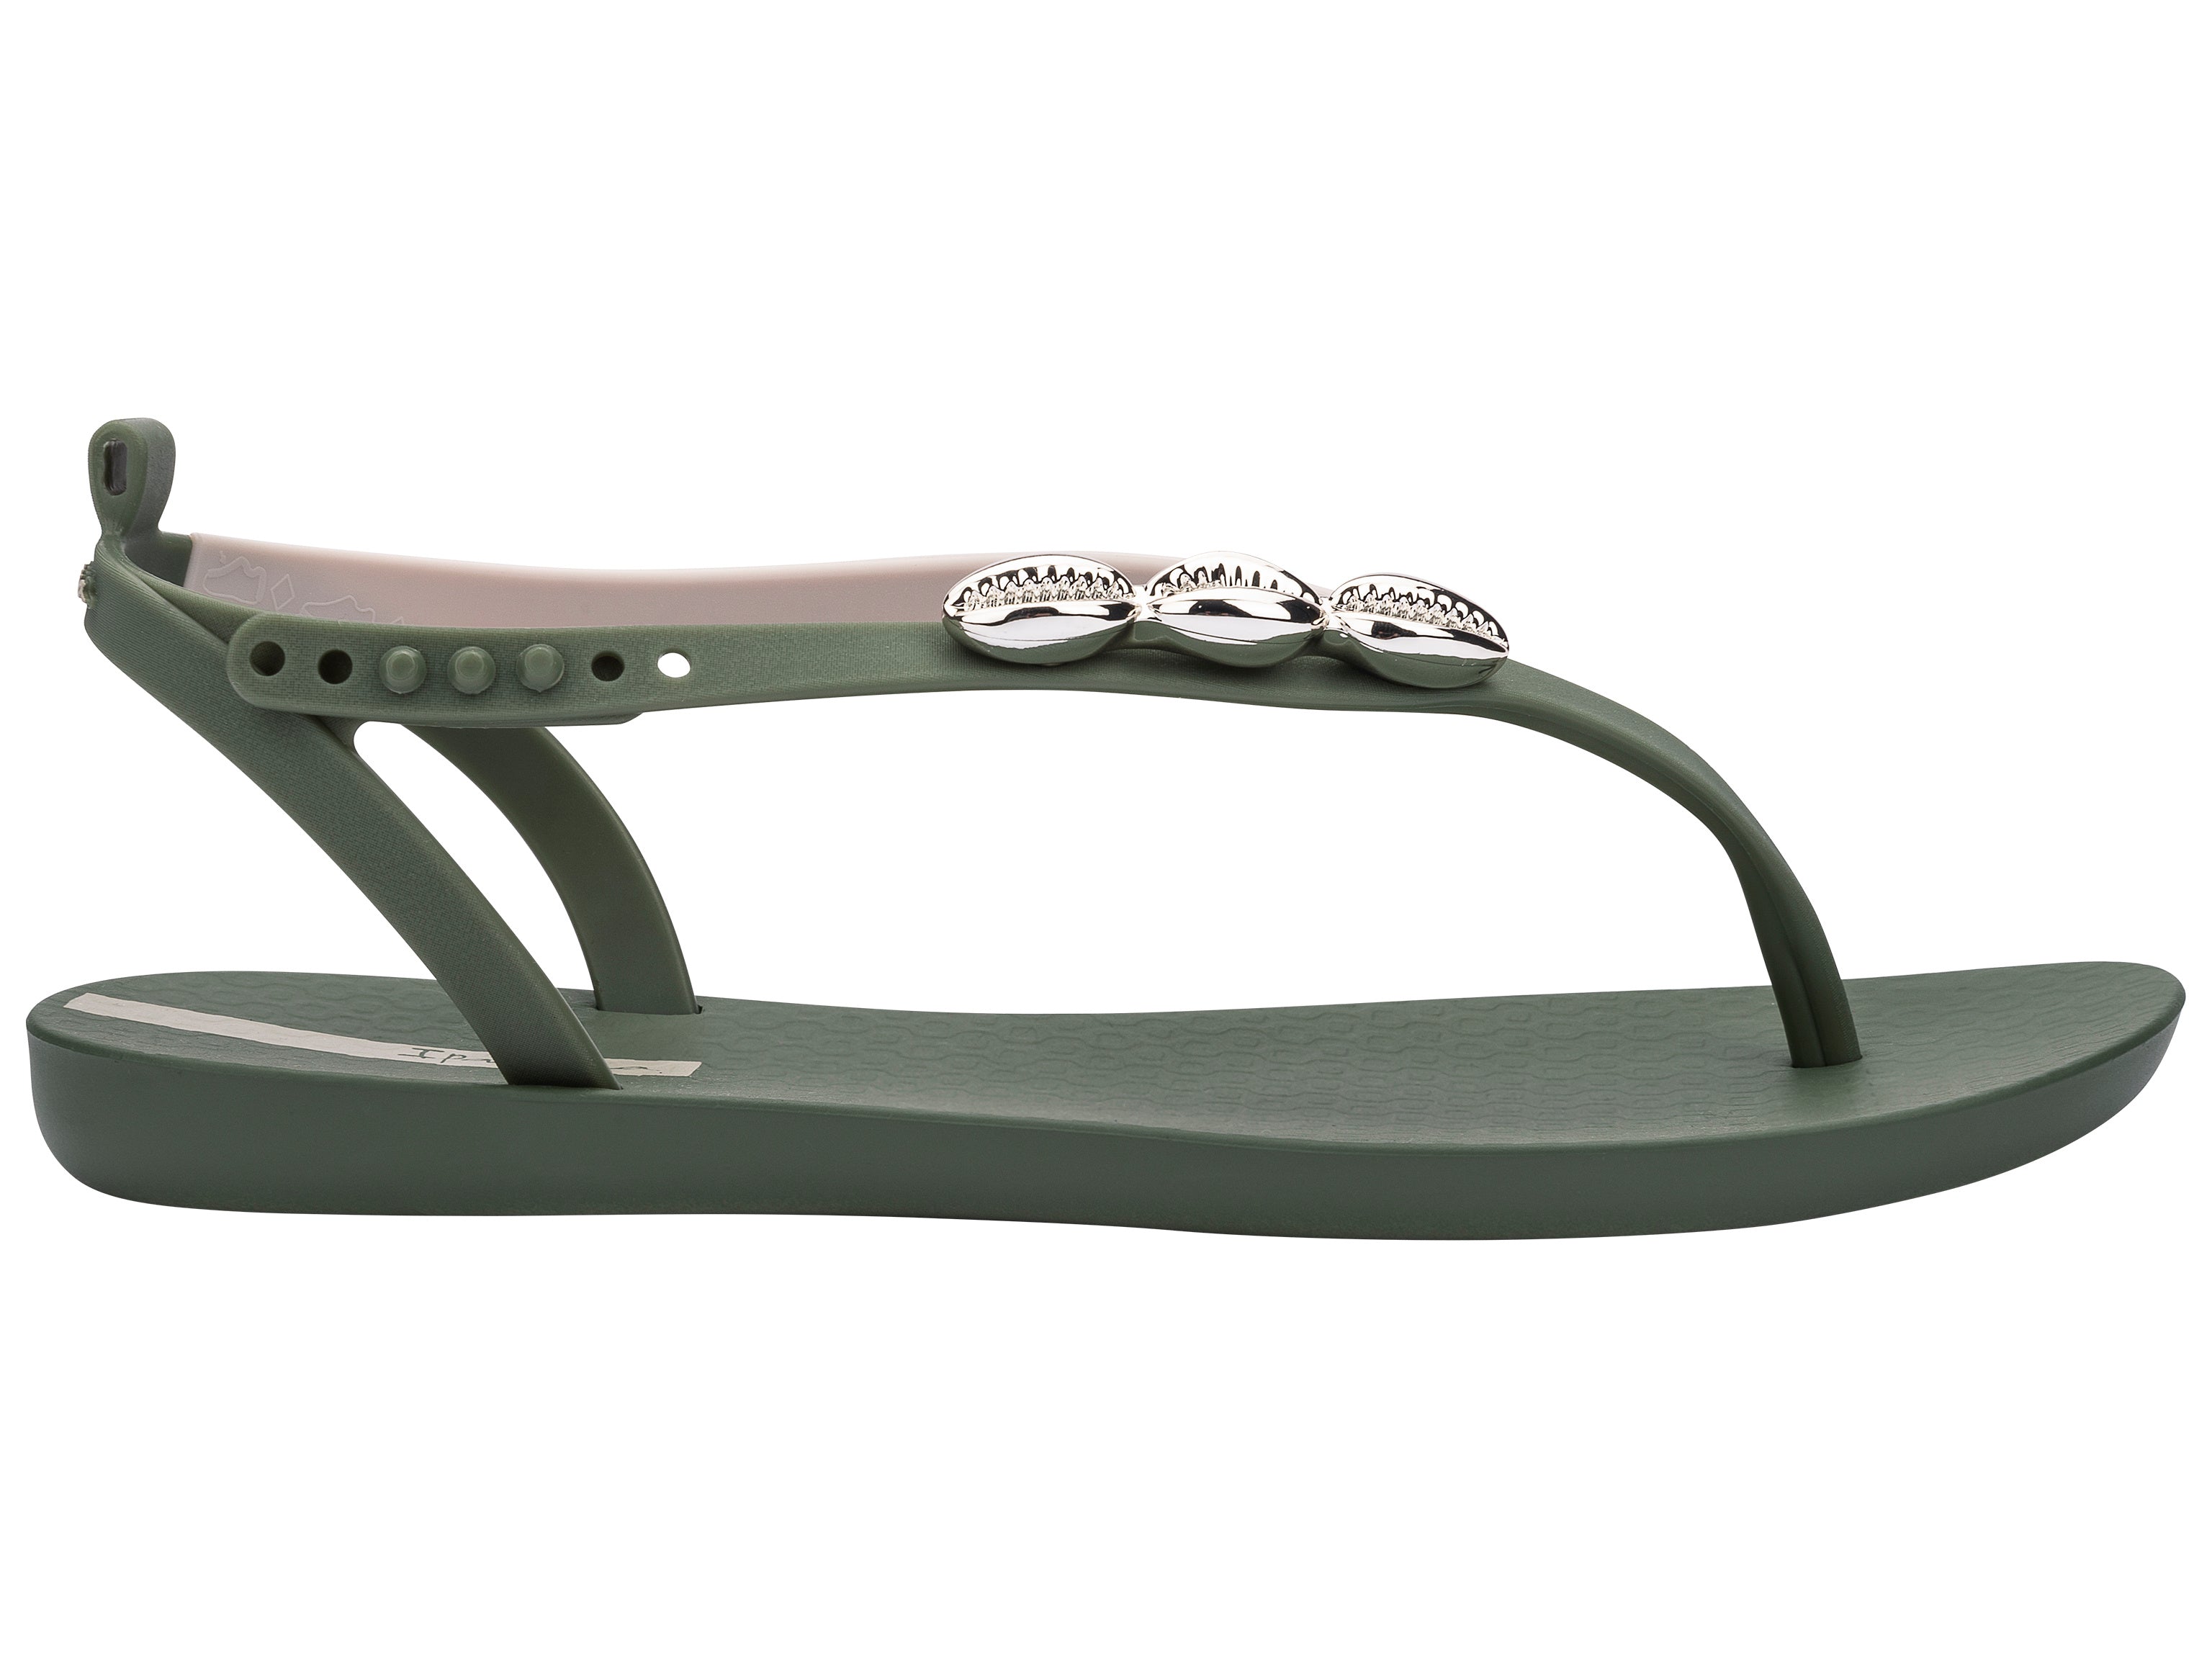 Outer side view of a green Ipanema Salty women's sandal with 3 silver shells on the strap.